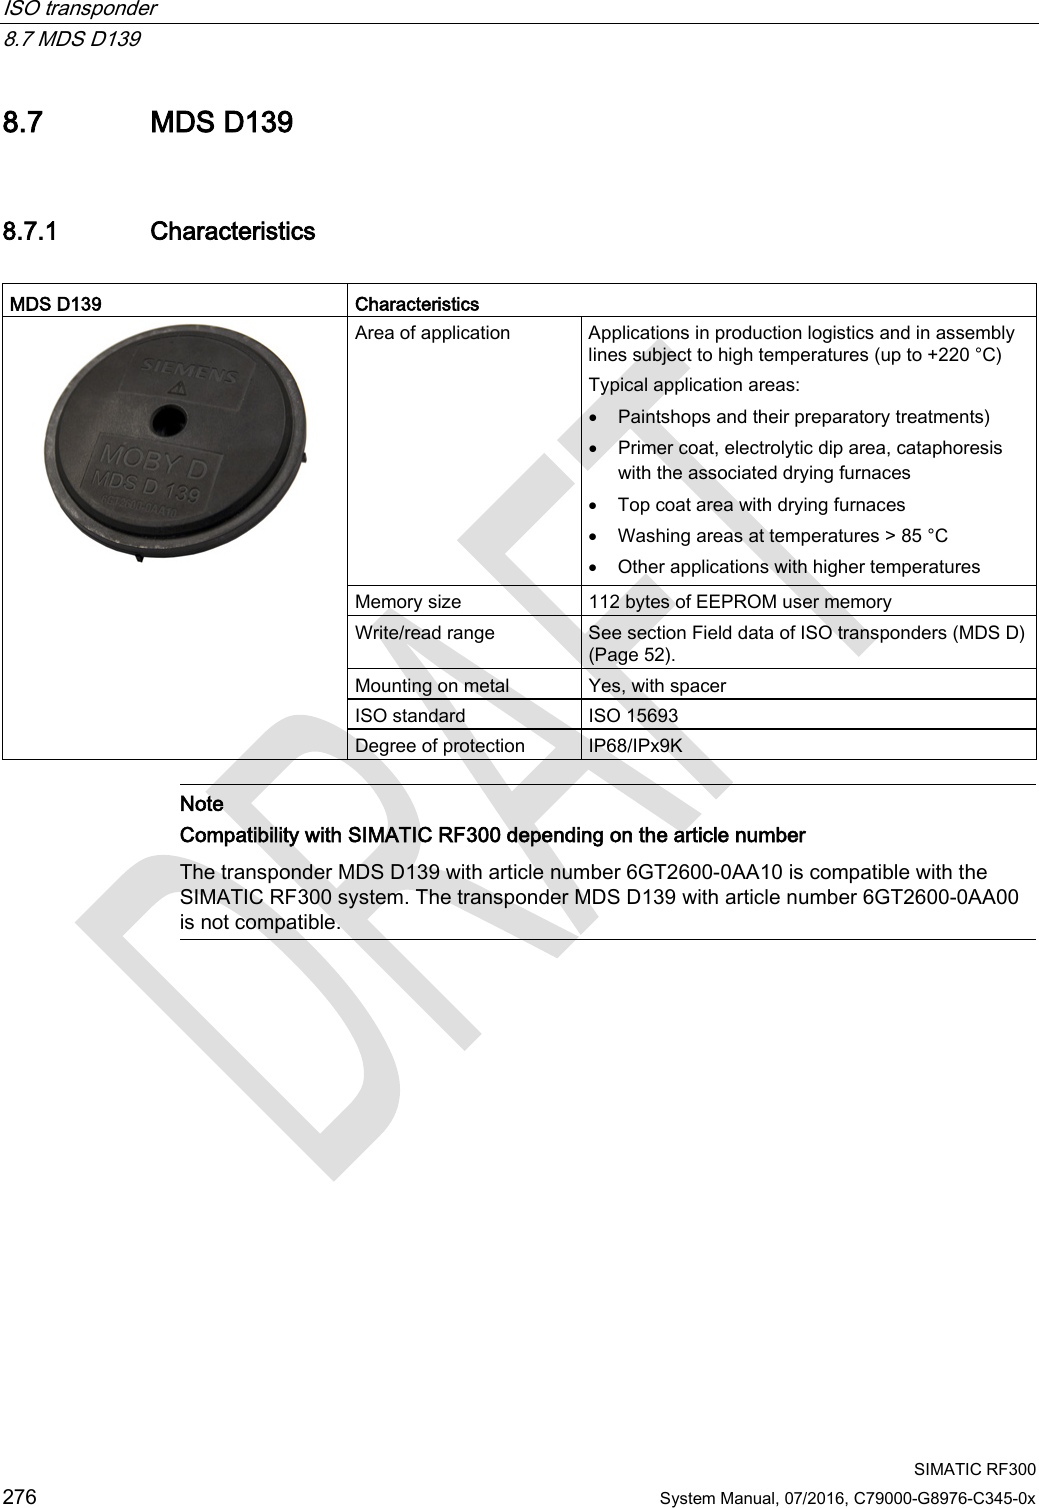 ISO transponder   8.7 MDS D139  SIMATIC RF300 276 System Manual, 07/2016, C79000-G8976-C345-0x 8.7 MDS D139 8.7.1 Characteristics  MDS D139 Characteristics  Area of application Applications in production logistics and in assembly lines subject to high temperatures (up to +220 °C) Typical application areas: • Paintshops and their preparatory treatments) • Primer coat, electrolytic dip area, cataphoresis with the associated drying furnaces • Top coat area with drying furnaces • Washing areas at temperatures &gt; 85 °C • Other applications with higher temperatures Memory size 112 bytes of EEPROM user memory Write/read range See section Field data of ISO transponders (MDS D) (Page 52). Mounting on metal Yes, with spacer ISO standard ISO 15693 Degree of protection IP68/IPx9K   Note Compatibility with SIMATIC RF300 depending on the article number The transponder MDS D139 with article number 6GT2600-0AA10 is compatible with the SIMATIC RF300 system. The transponder MDS D139 with article number 6GT2600-0AA00 is not compatible.  